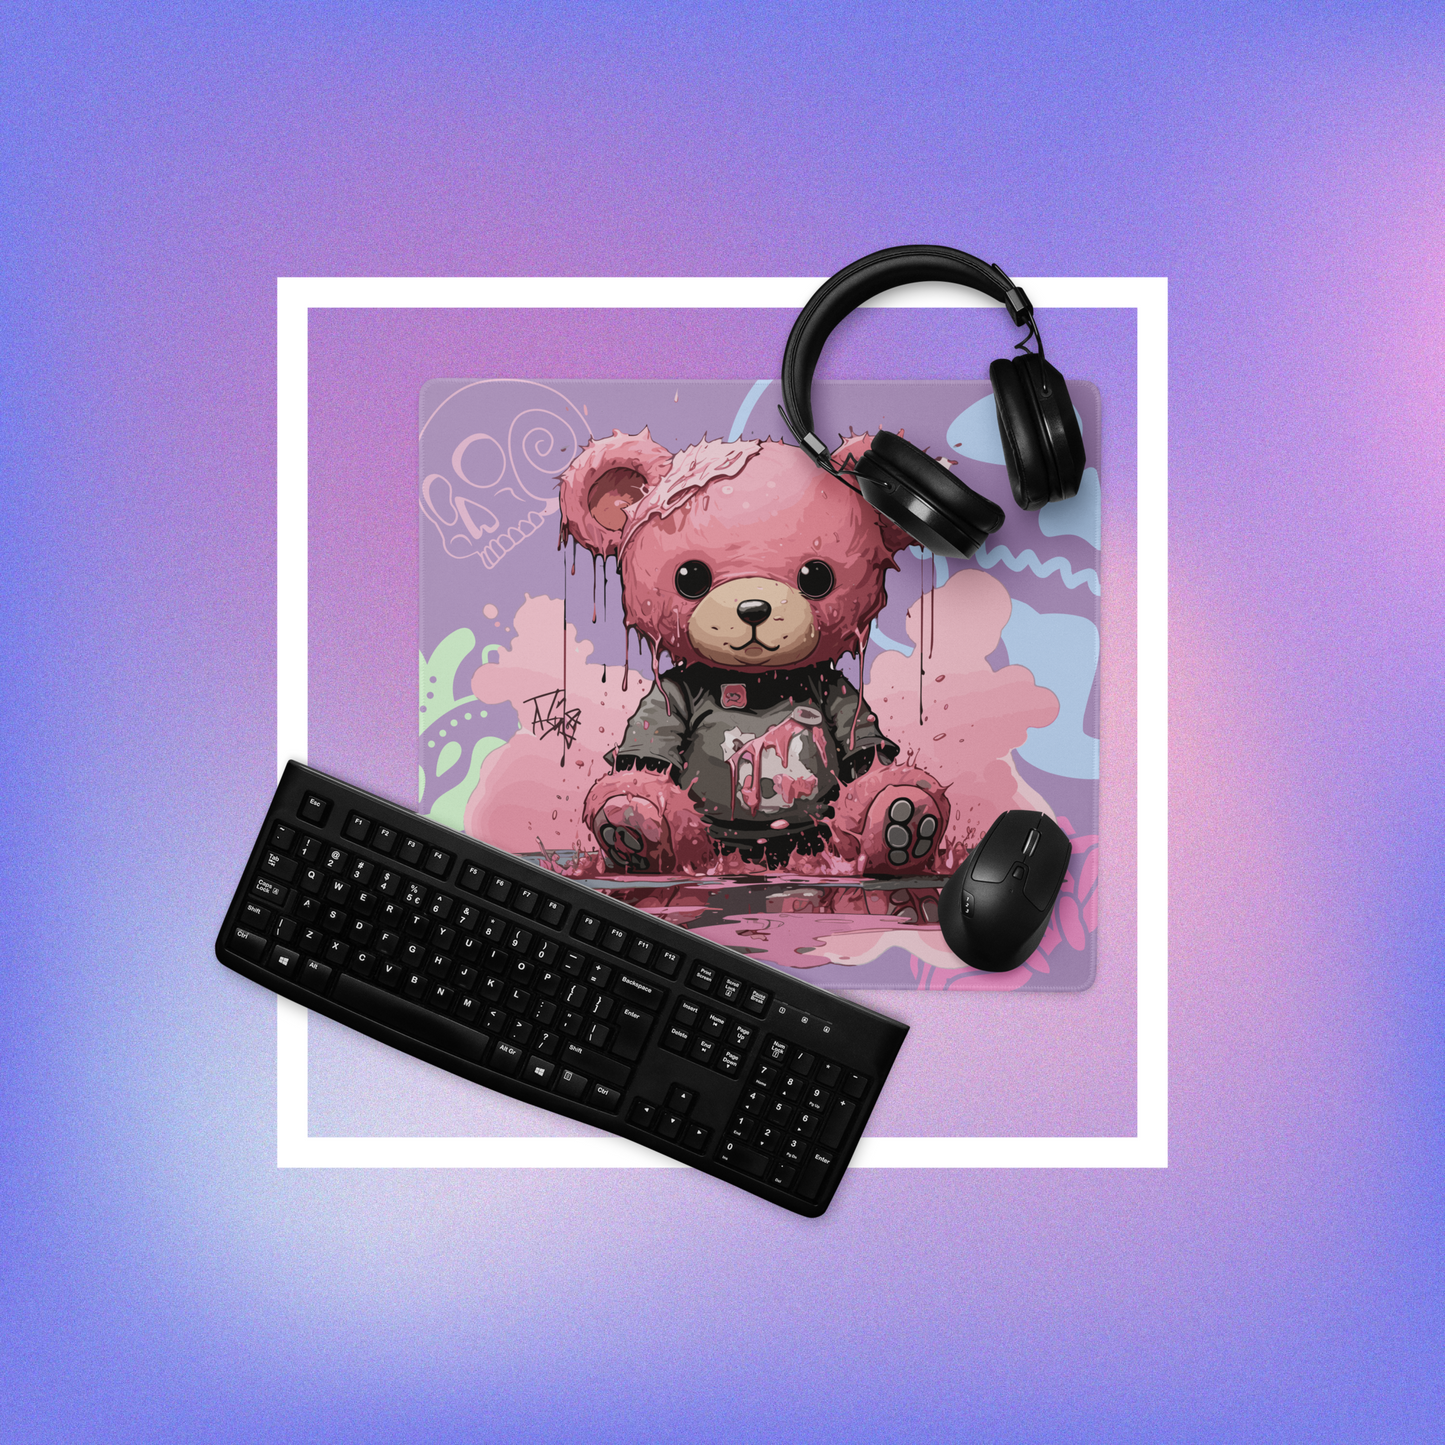 Lovely Teddy Gaming Mouse Pad, Premium-Textured Square Mousepad 18 x 16 Inch, Stitched Edge Anti-Slip Waterproof Rubber Mouse Mat, Pretty Cute Mouse Pad for Office Gaming Laptop